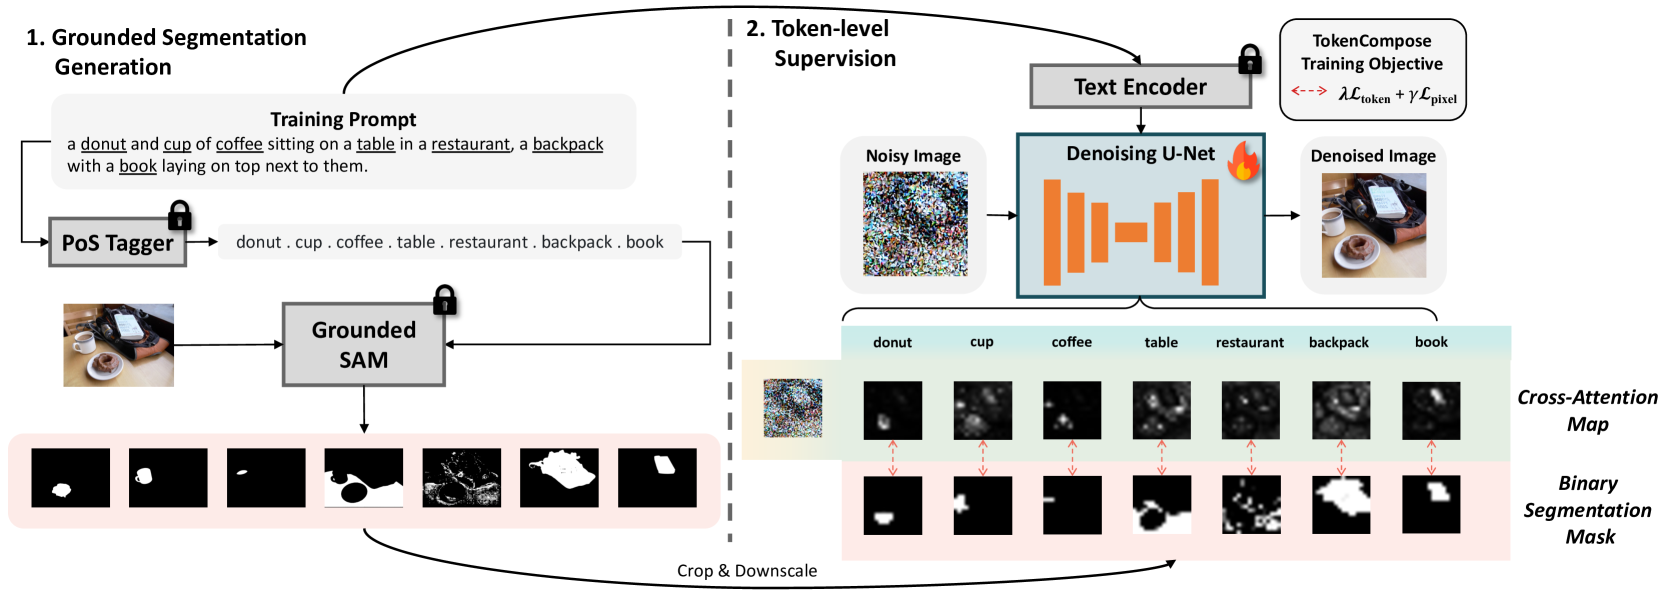 TokenCompose: Text-to-Image Diffusion with Token-level Supervision